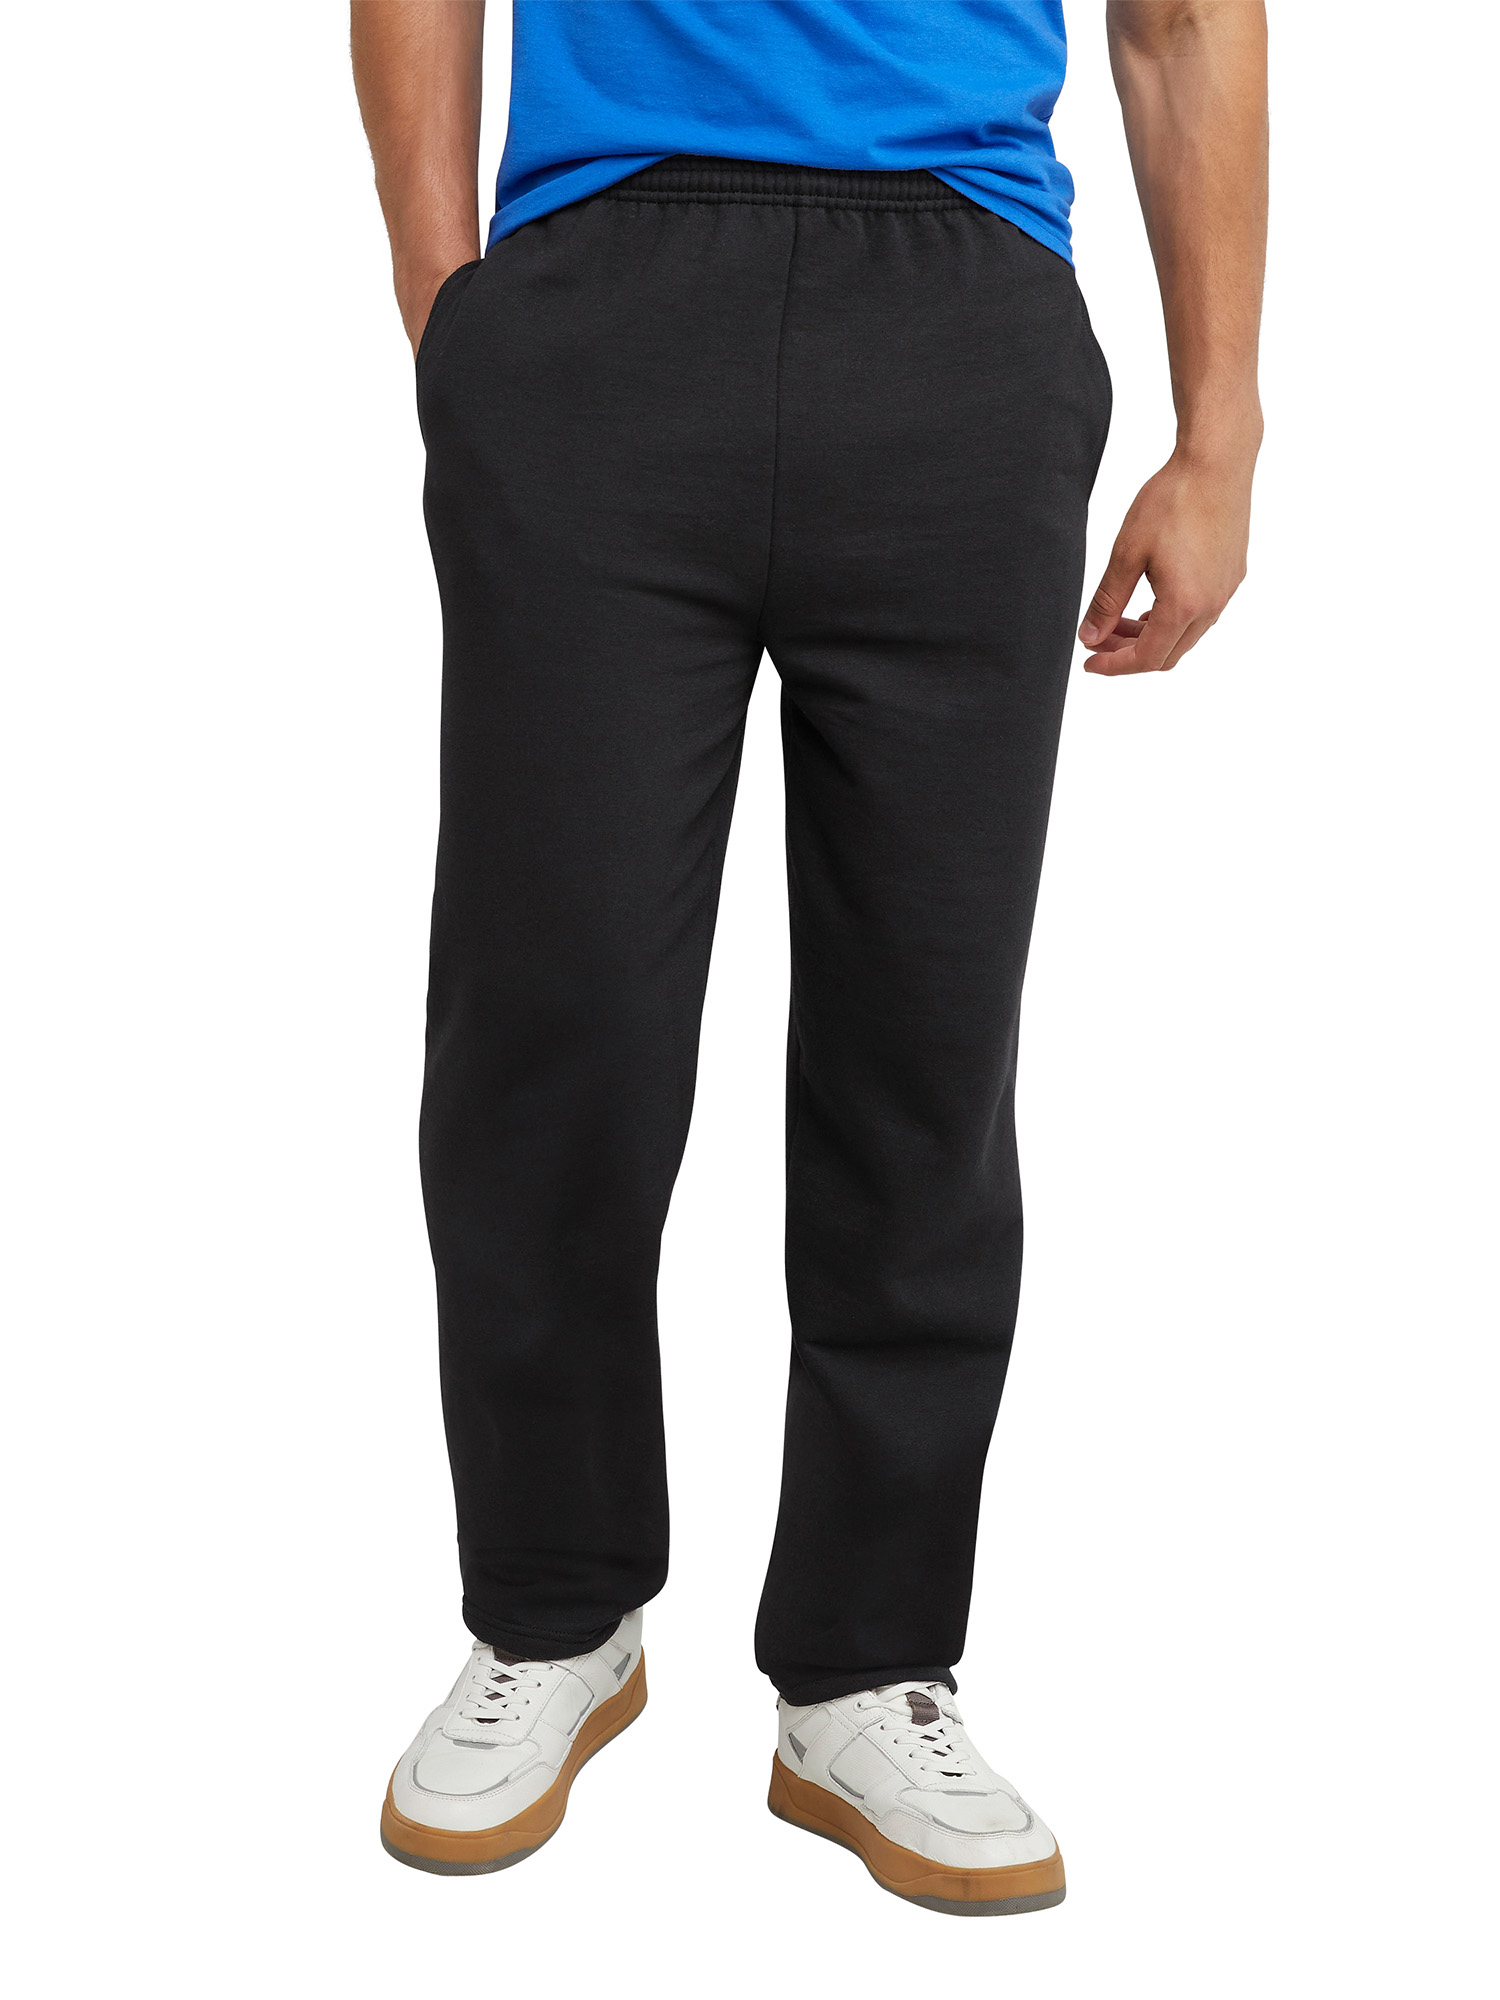 Hanes Men's and Big Men's EcoSmart Fleece Sweatpants with Pockets, up to Sizes 3XL - image 1 of 7